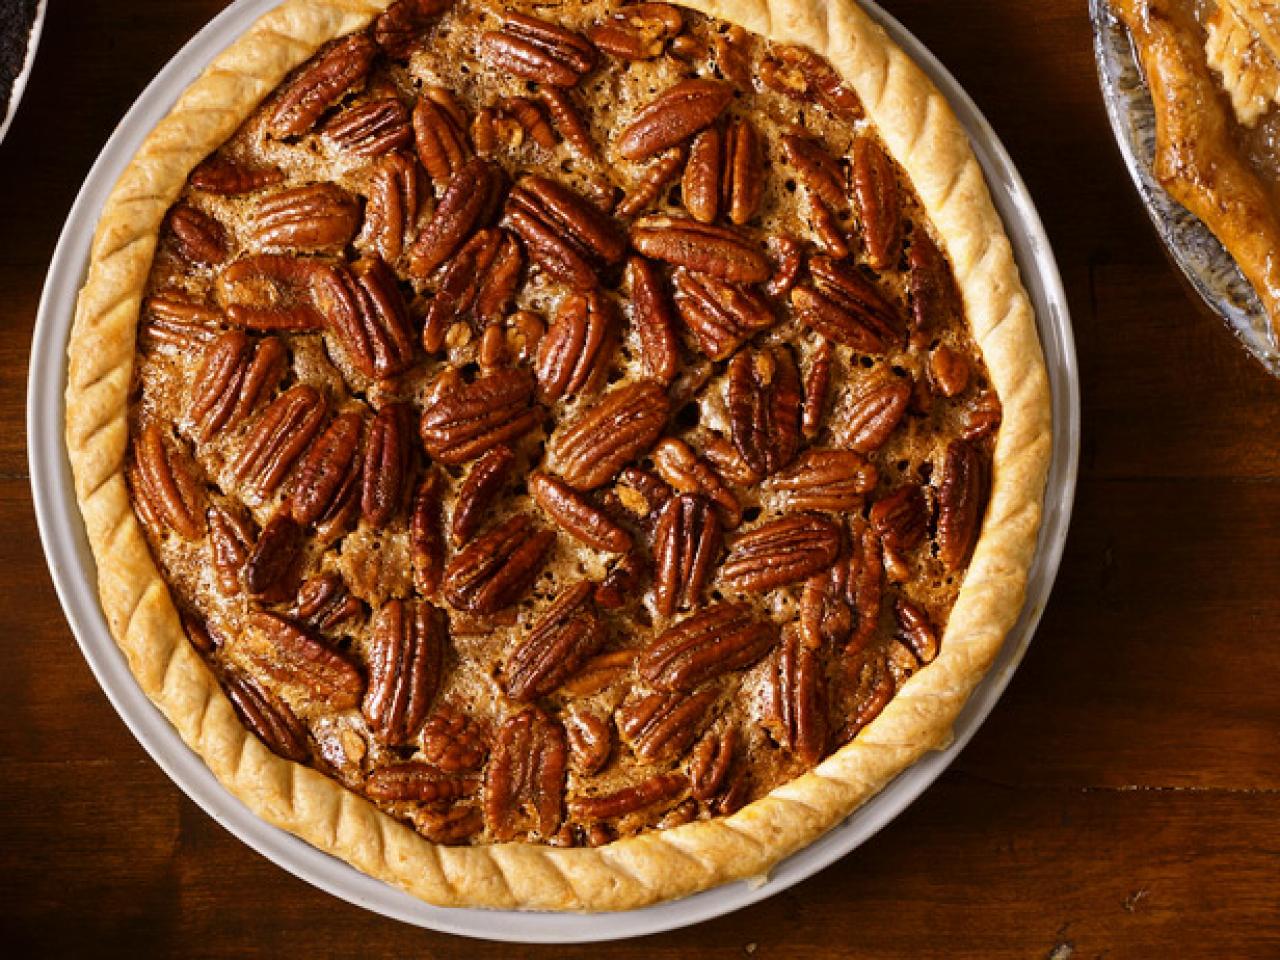 50 Pie Recipes : Recipes and Cooking : Food Network | Recipes, Dinners ...